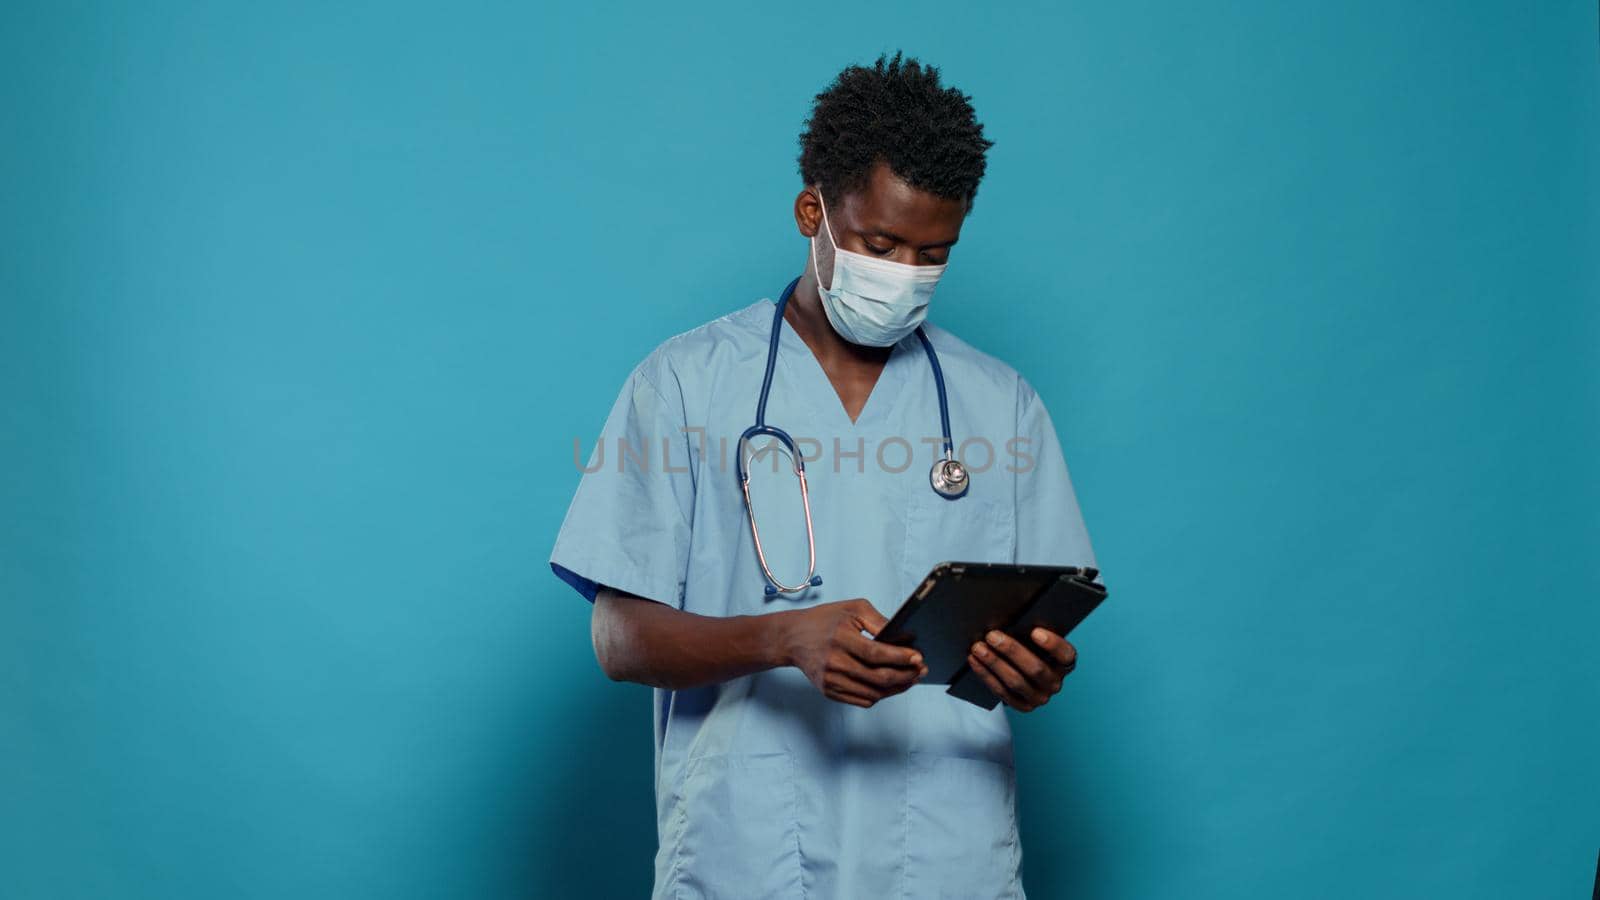 Medical assistant using digital tablet while wearing face mask by DCStudio